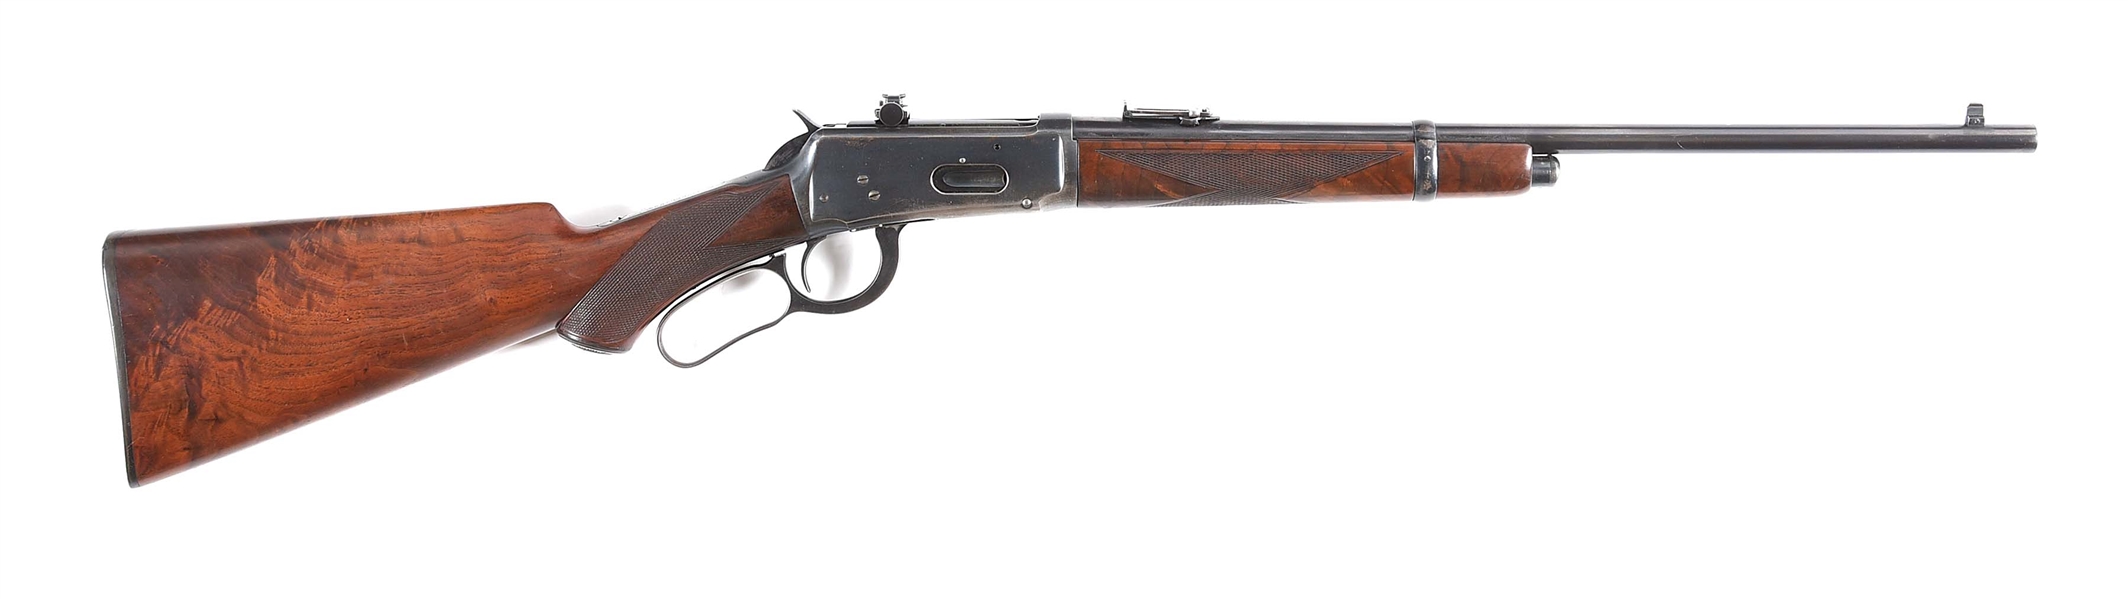 (C) DOCUMENTED SPECIAL ORDERED WINCHESTER 1894 DELUXE CARBINE.